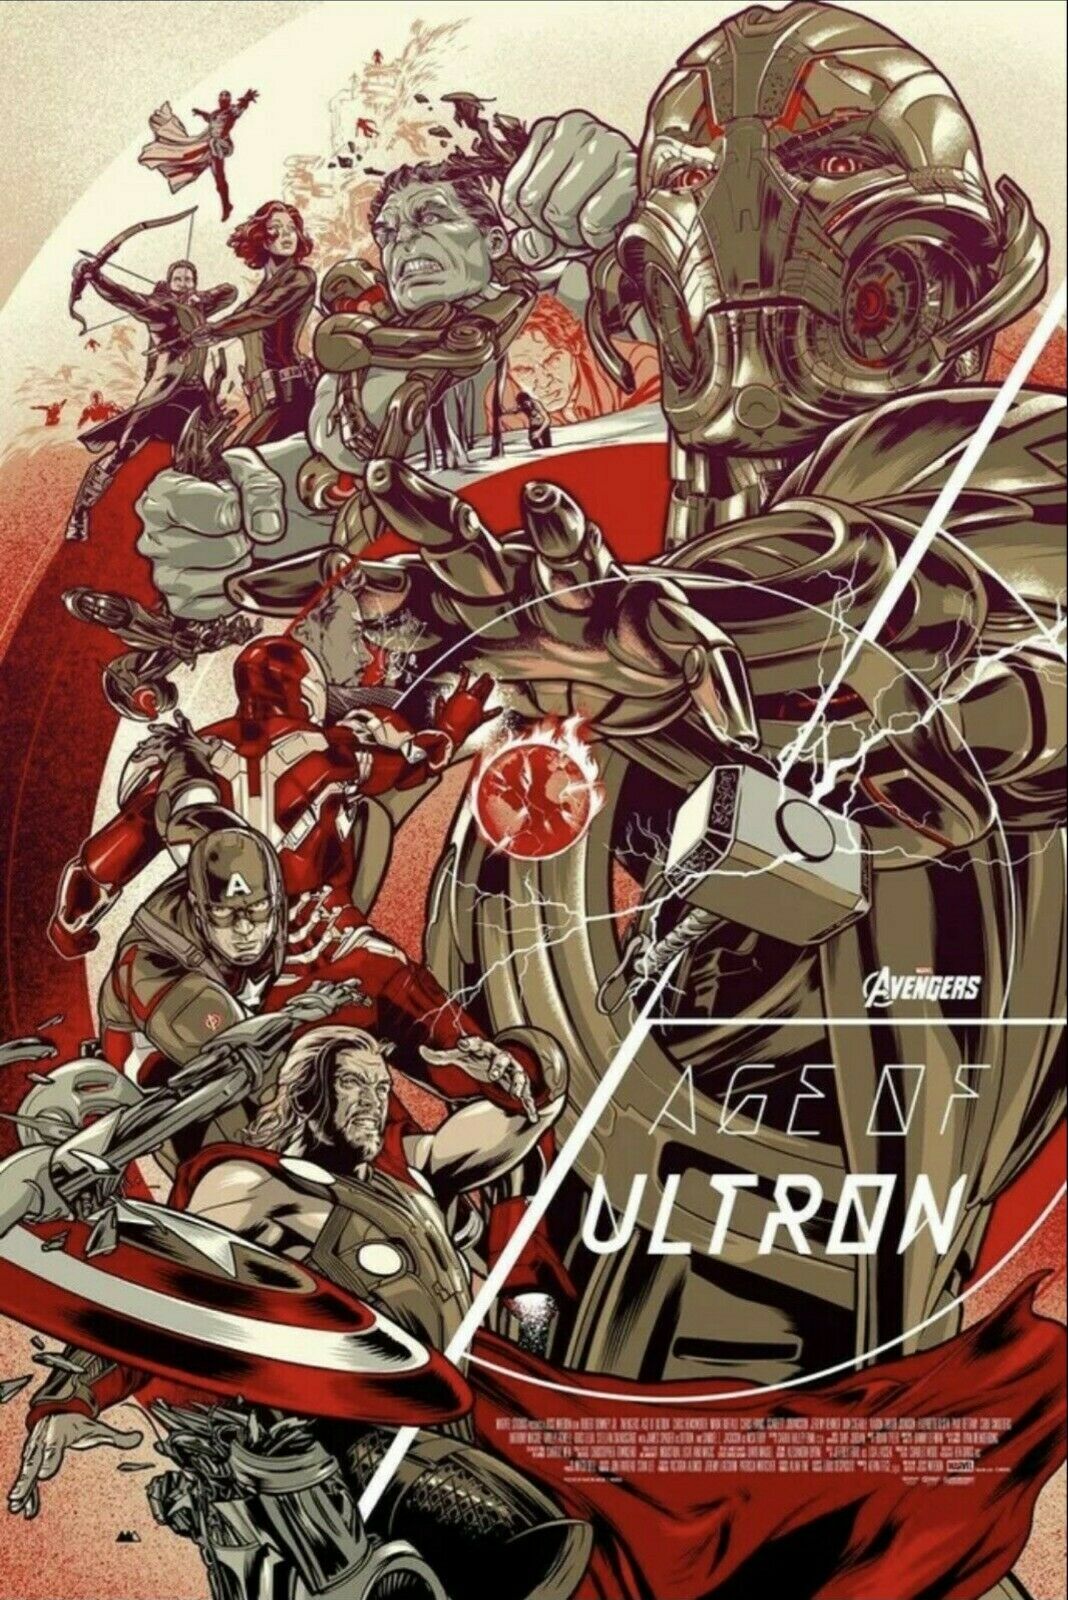 Martin Ansin - Avengers: Age of Ultron - Variant Edition